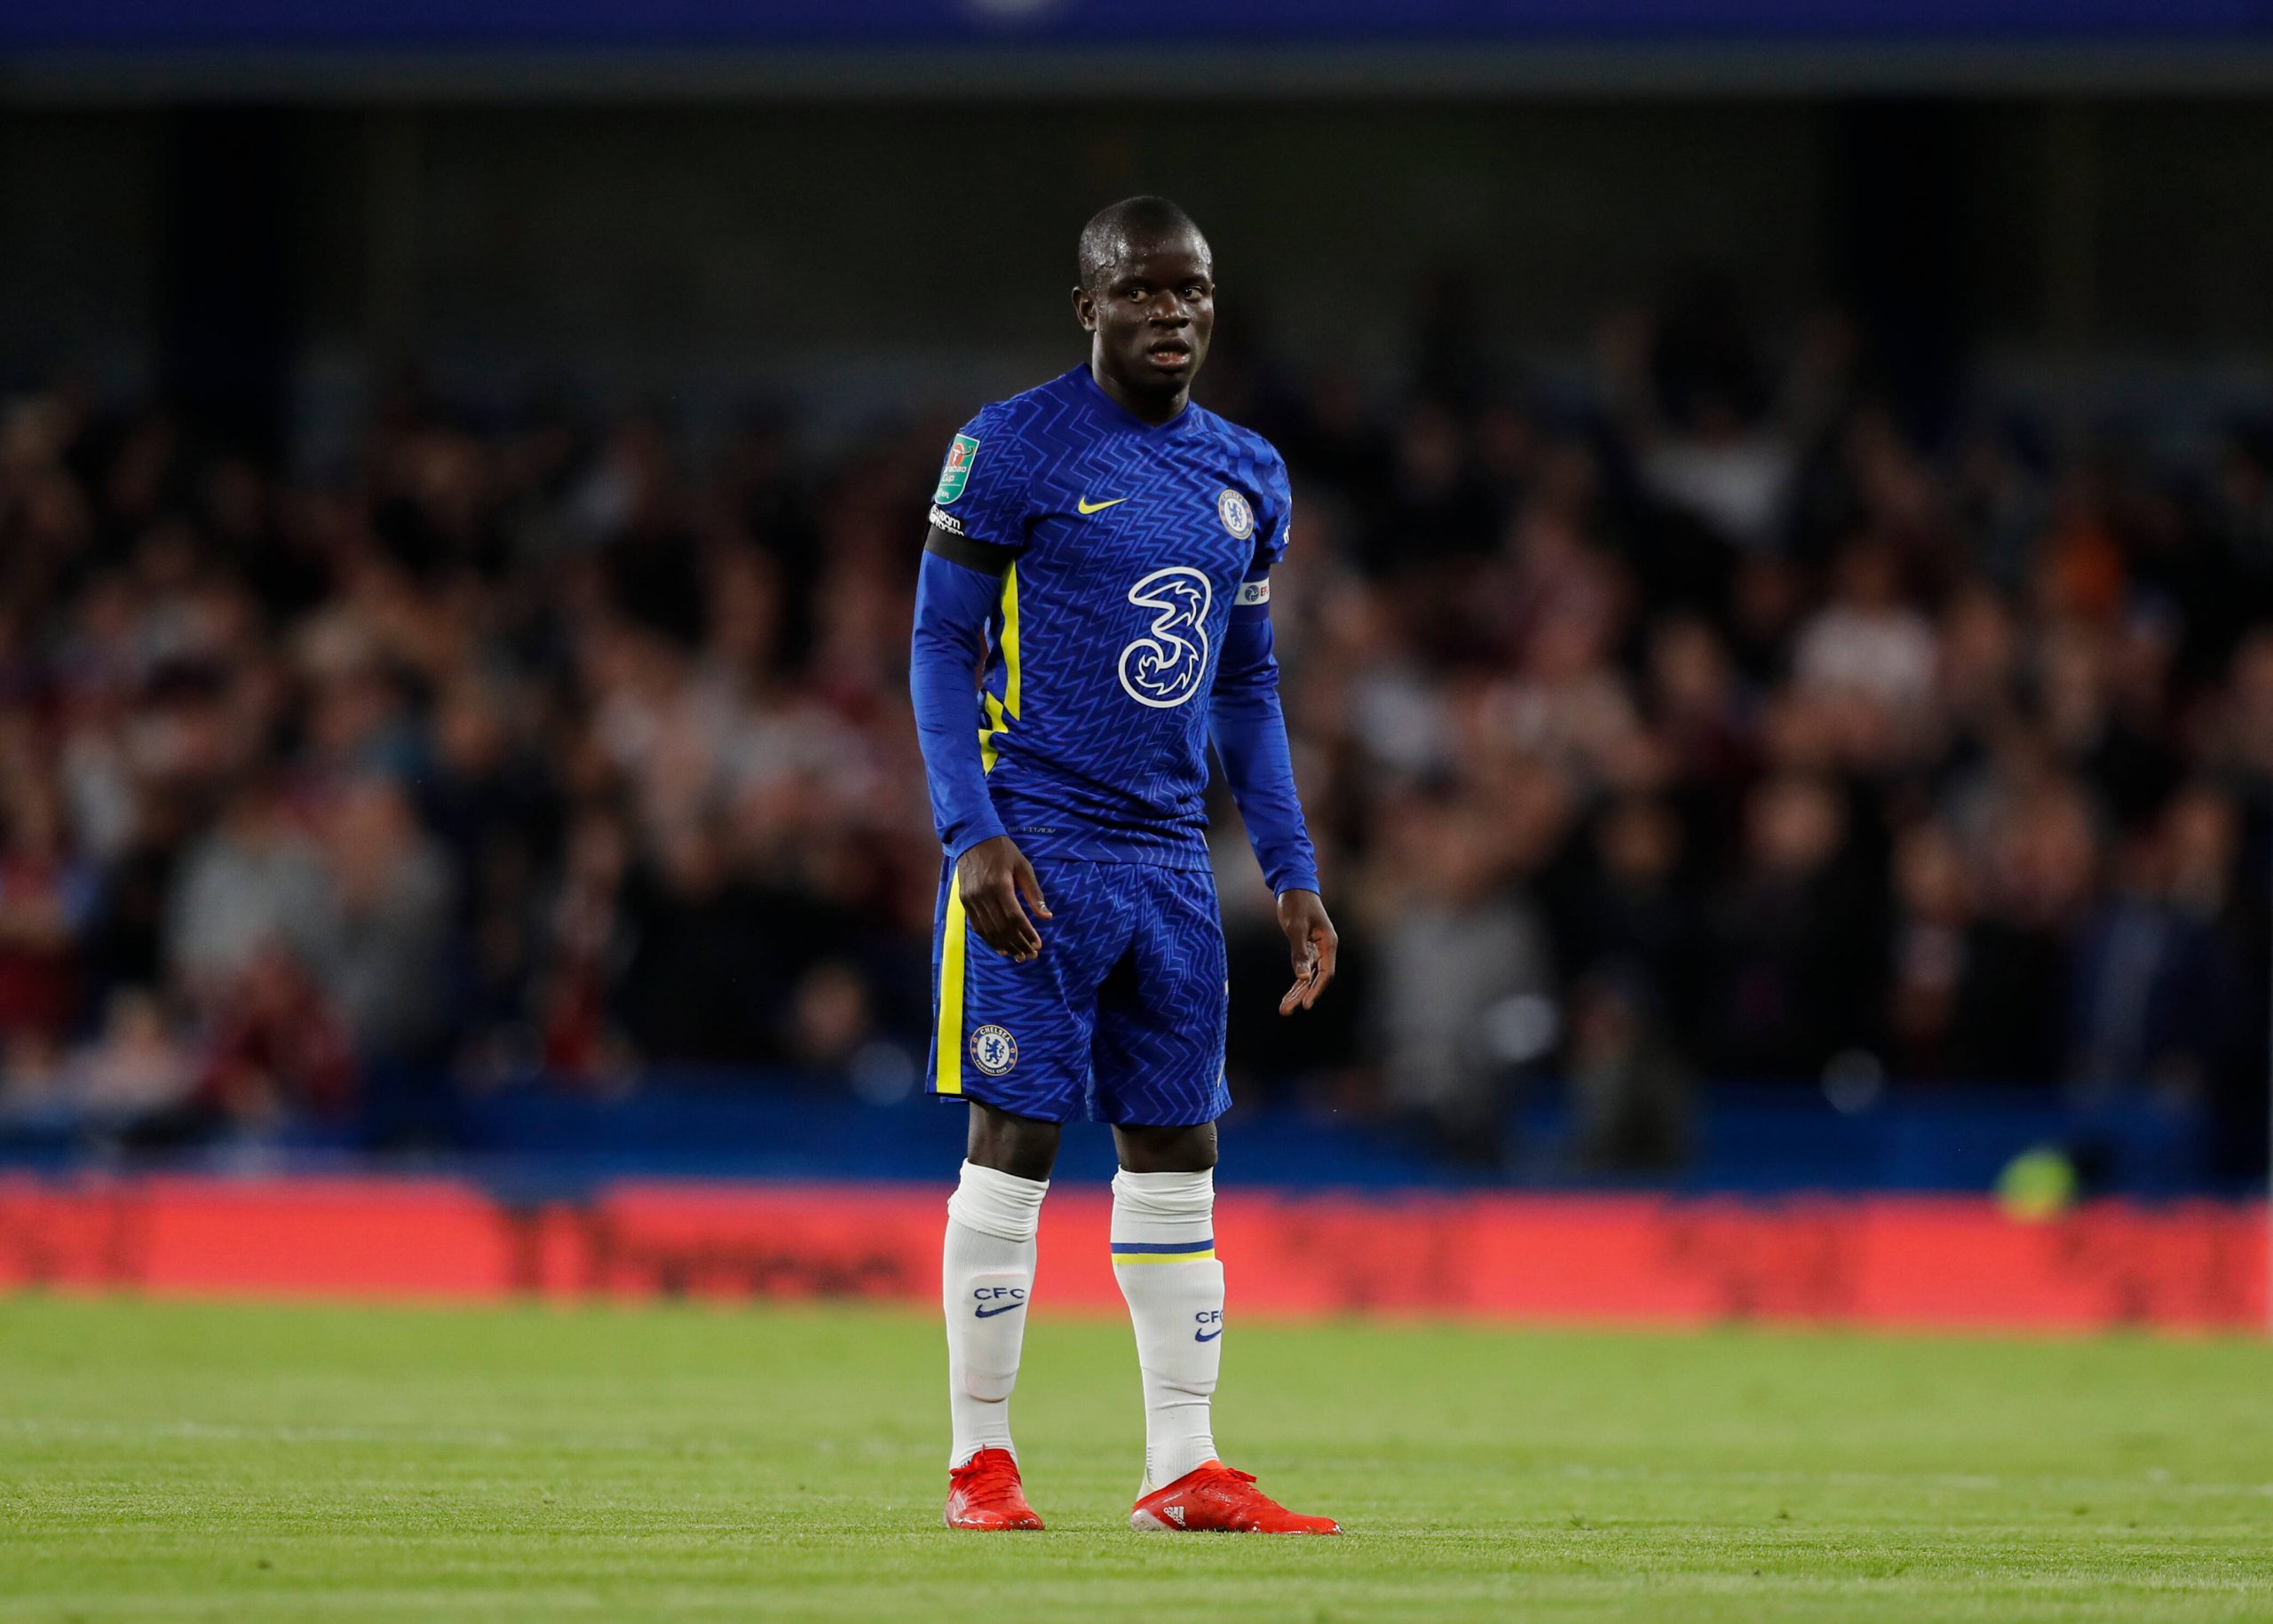 Kevin Campbell urges Arsenal to sign Chelsea midfielder N'Golo Kante